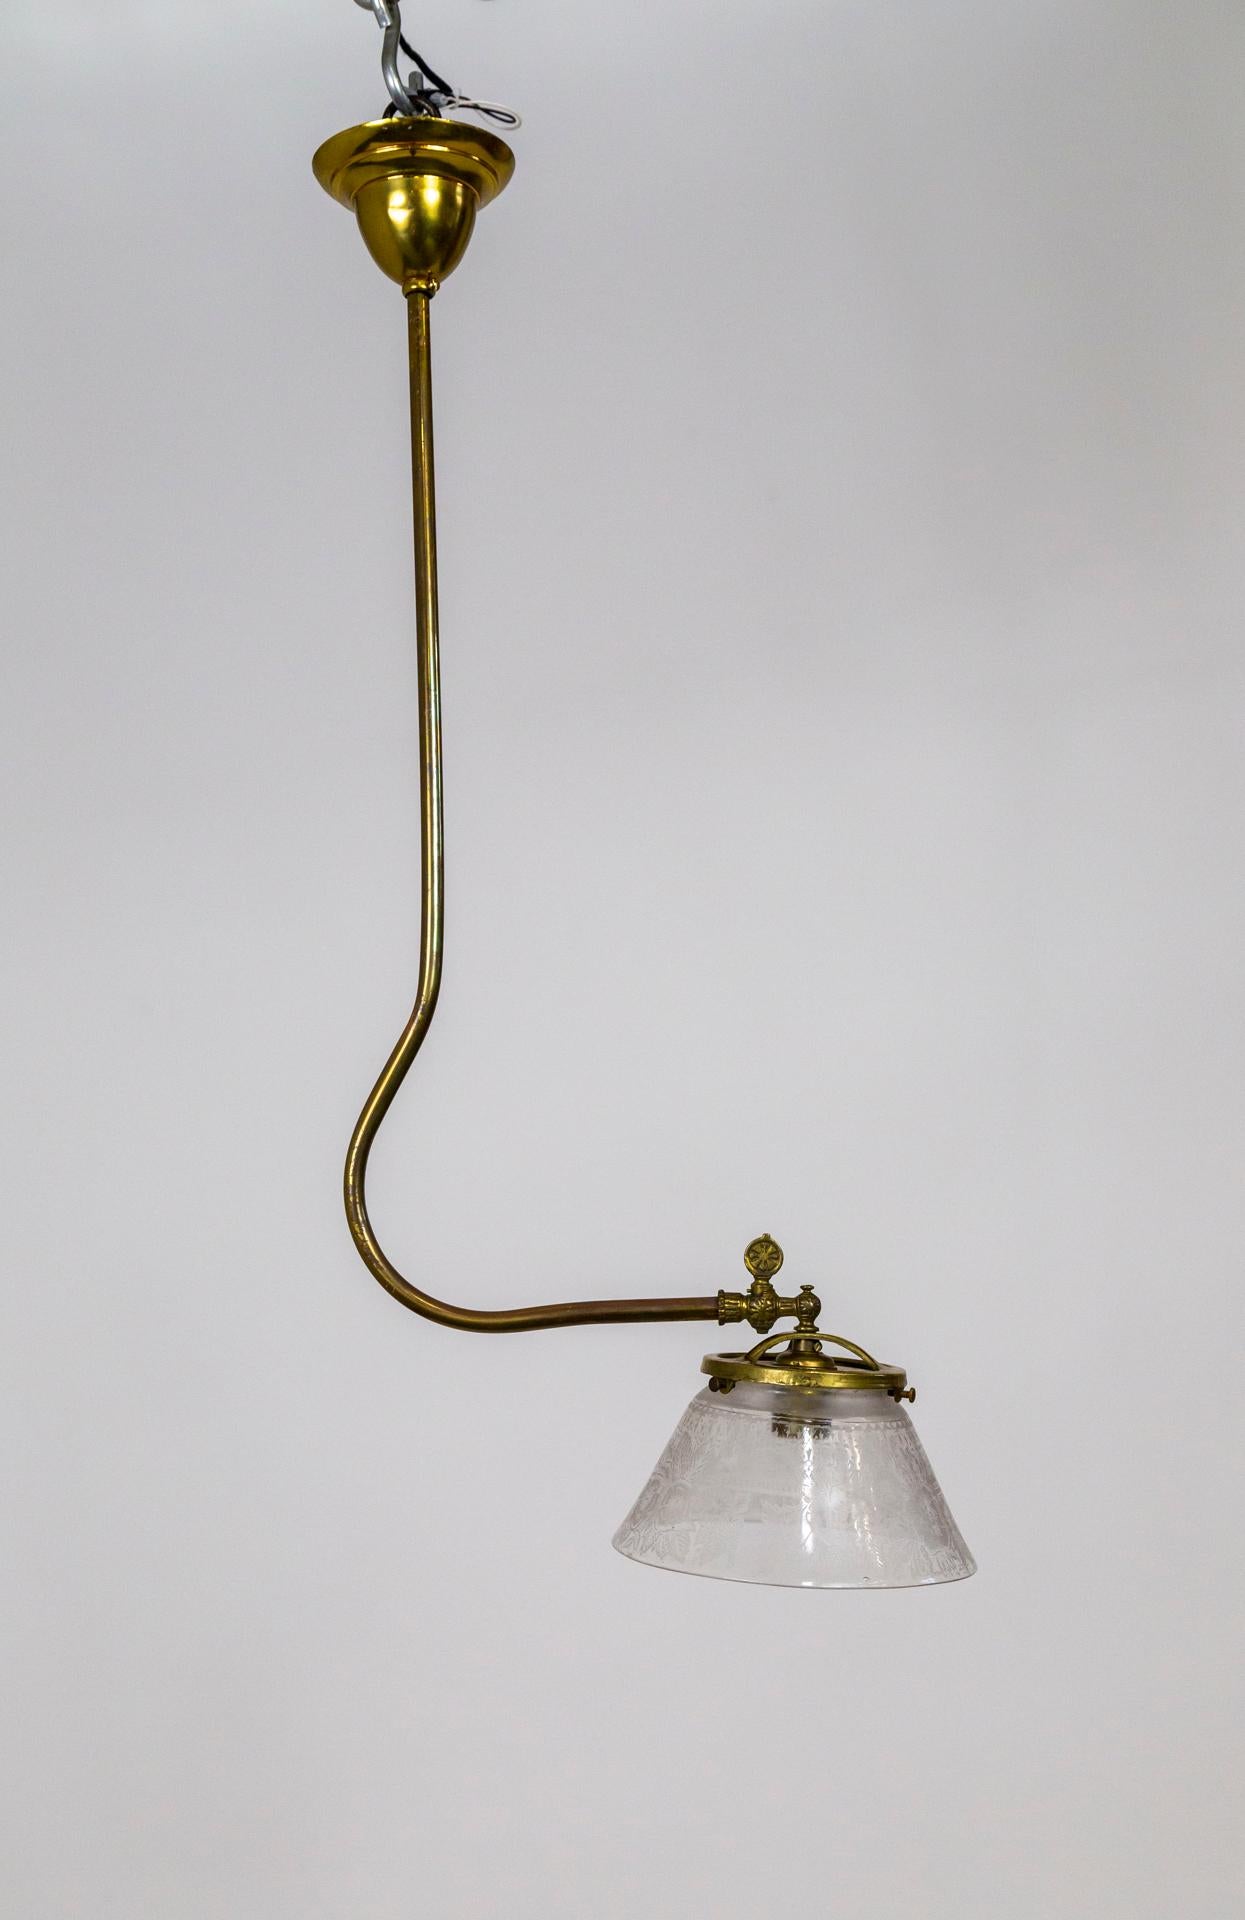 Brass Victorian J-Style Ceiling Light Fixture w/ Etched Glass Shade For Sale